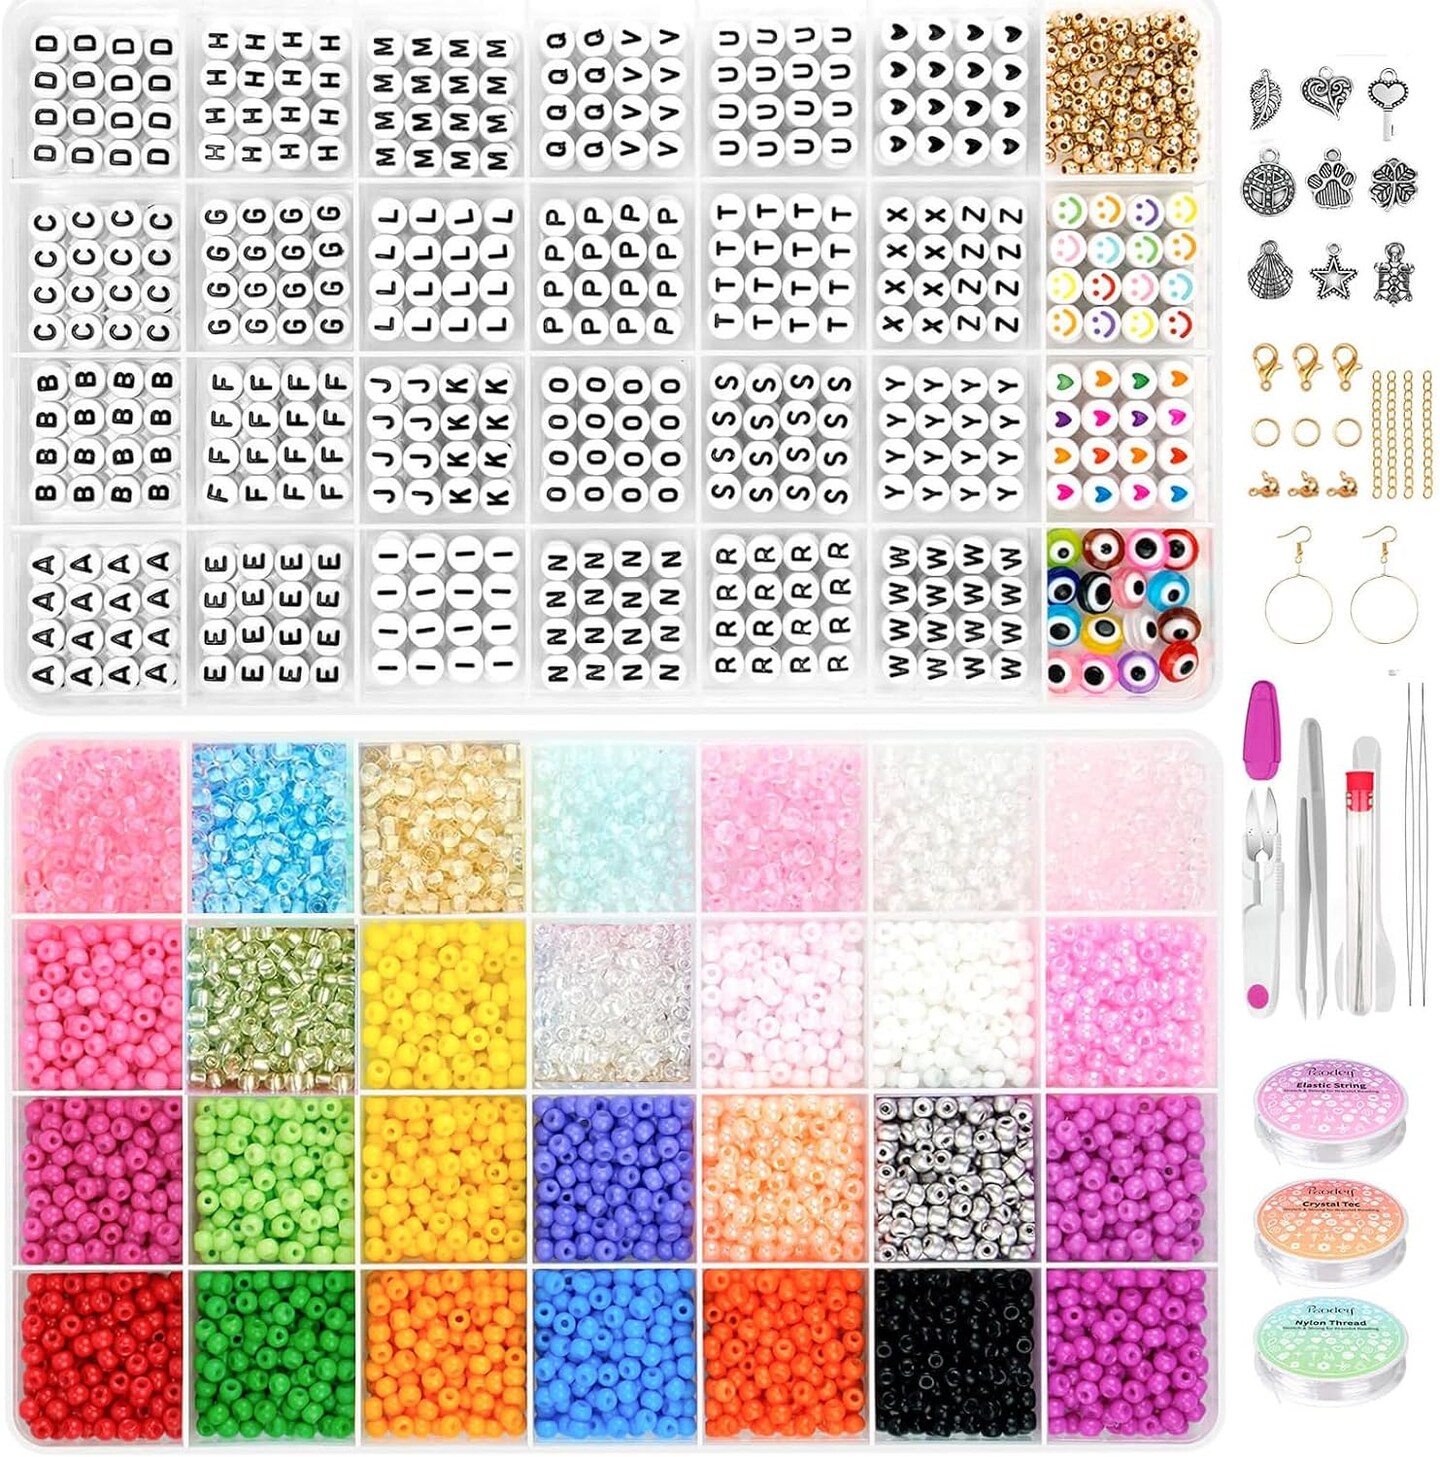 4mm Seed Beads Uniform, 1000pcs Letter Beads, 28 Colors 6500pcs 6/0 Glass Seed Beads for Bracelets Making, Loom for Name Friendship Bracelets Jewelry Making Kit with Tools